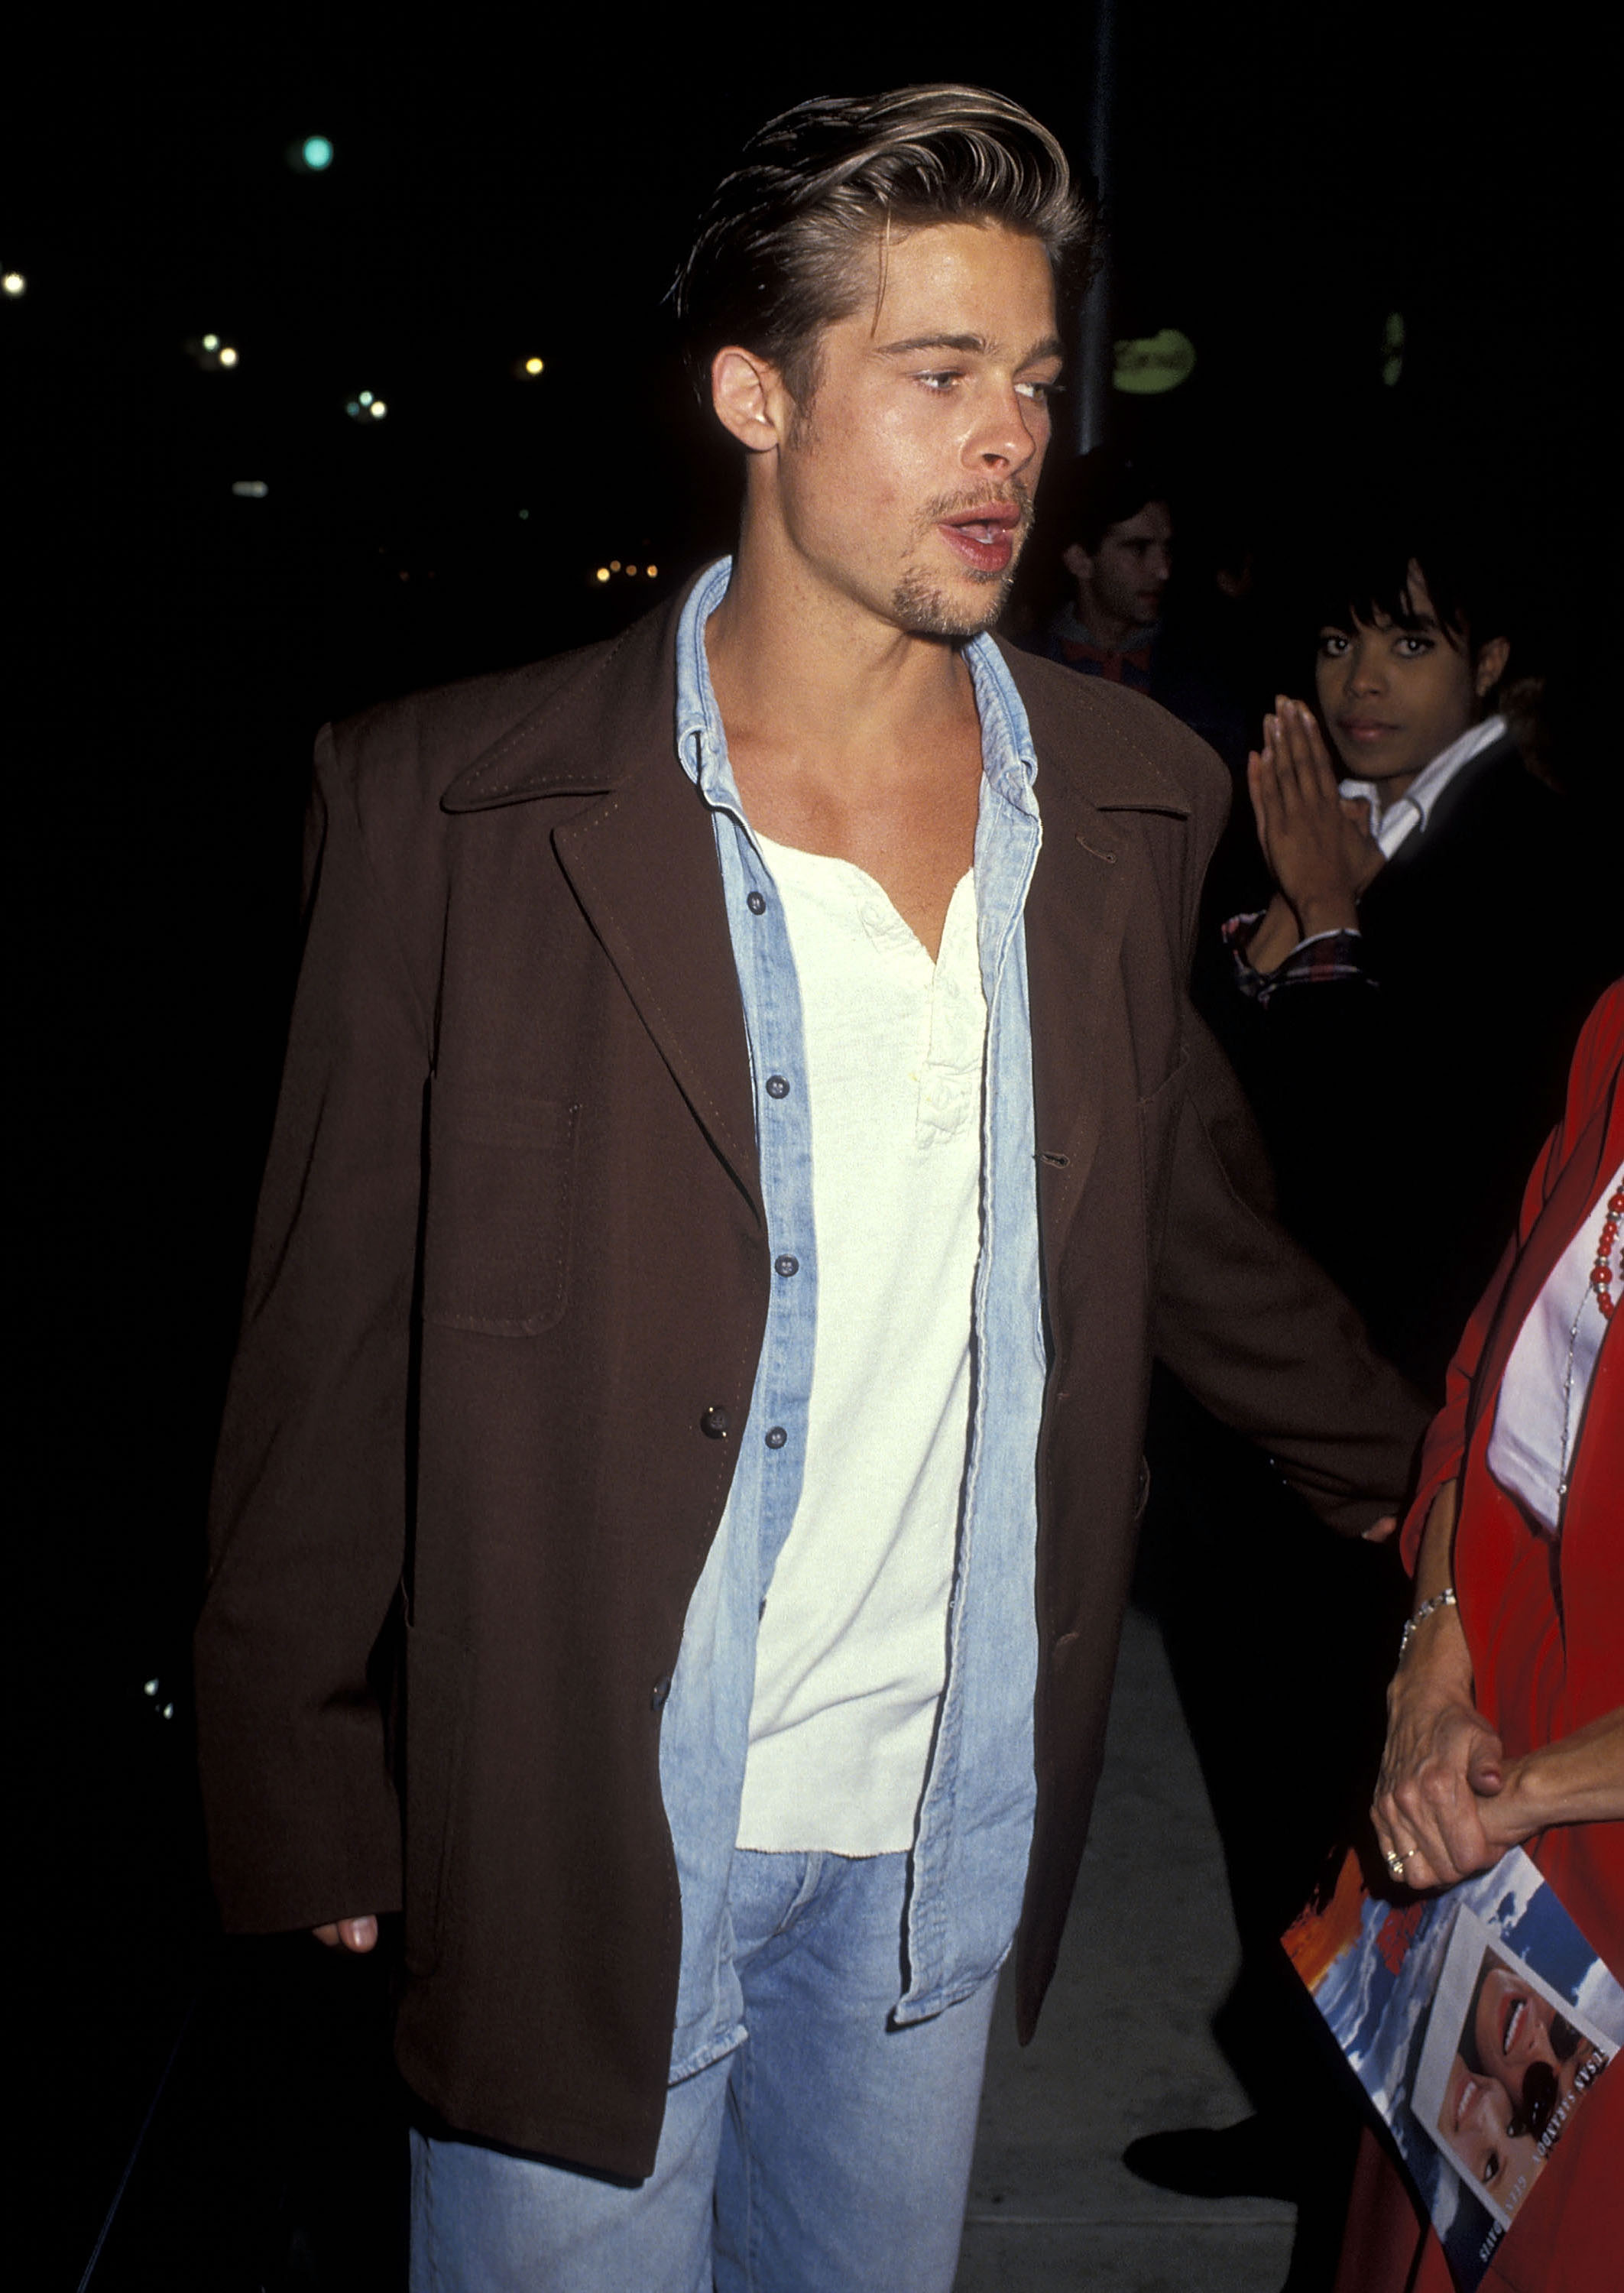 Brad Pitt at the premiere for "Thelma & Louise" in Santa Monica, 1991 | Source: Getty Images